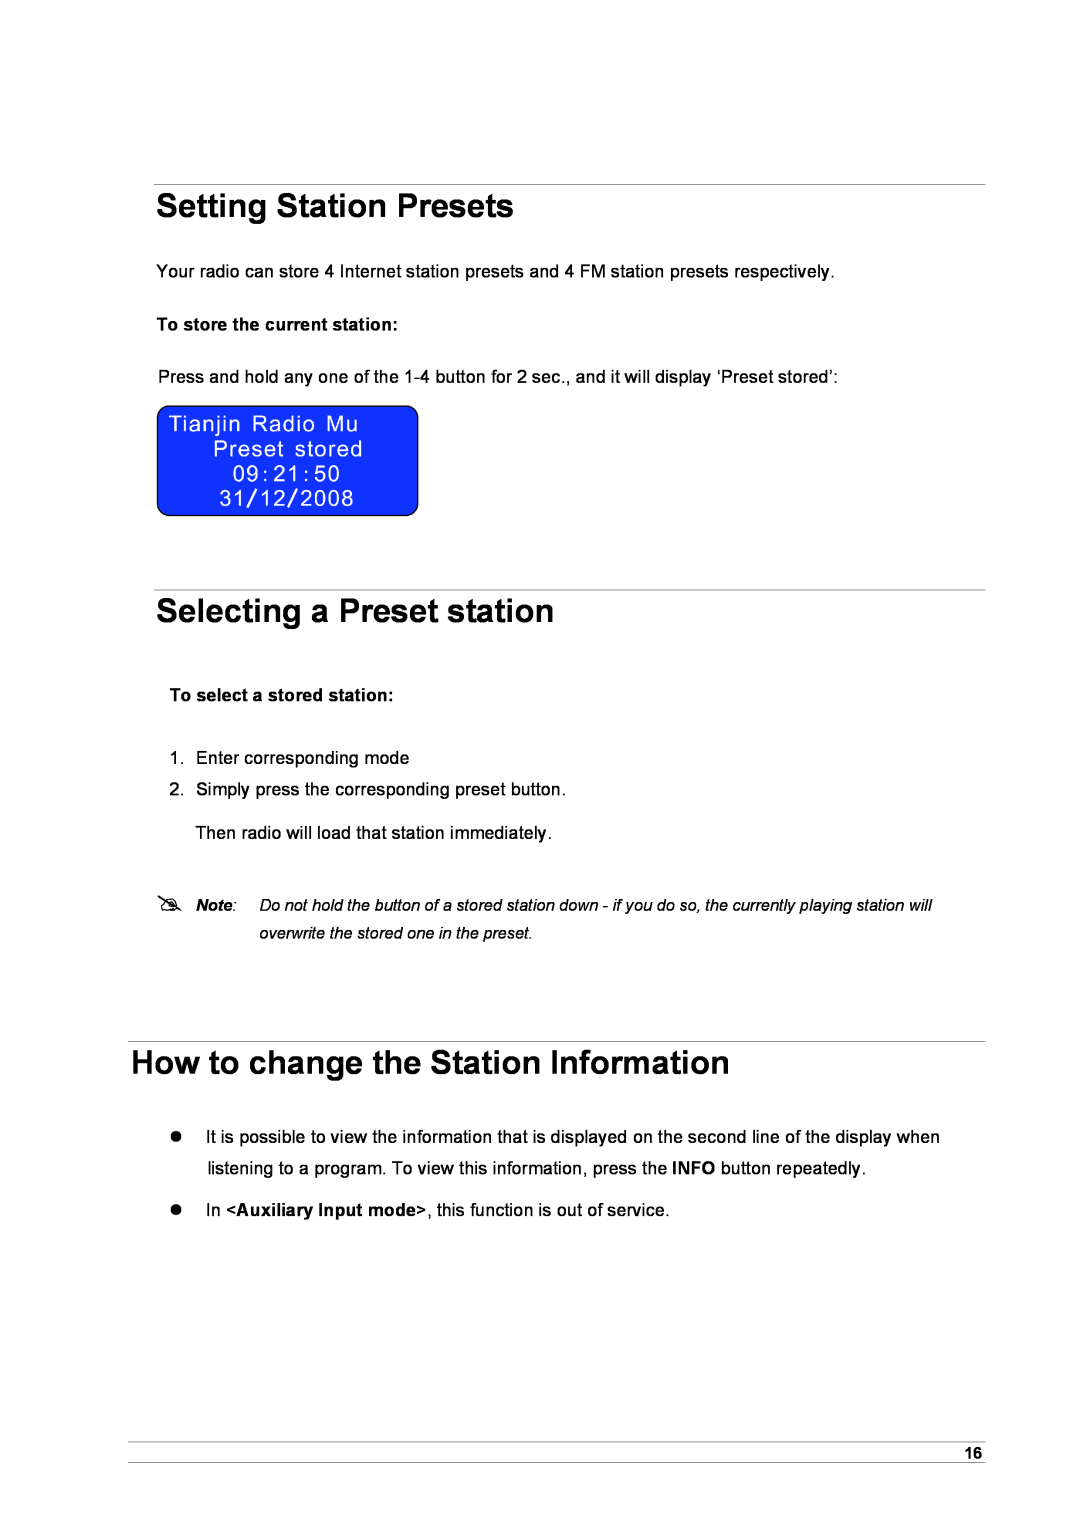 Cobra Electronics CIR 1000 A Setting Station Presets, Selecting a Preset station, How to change the Station Information 